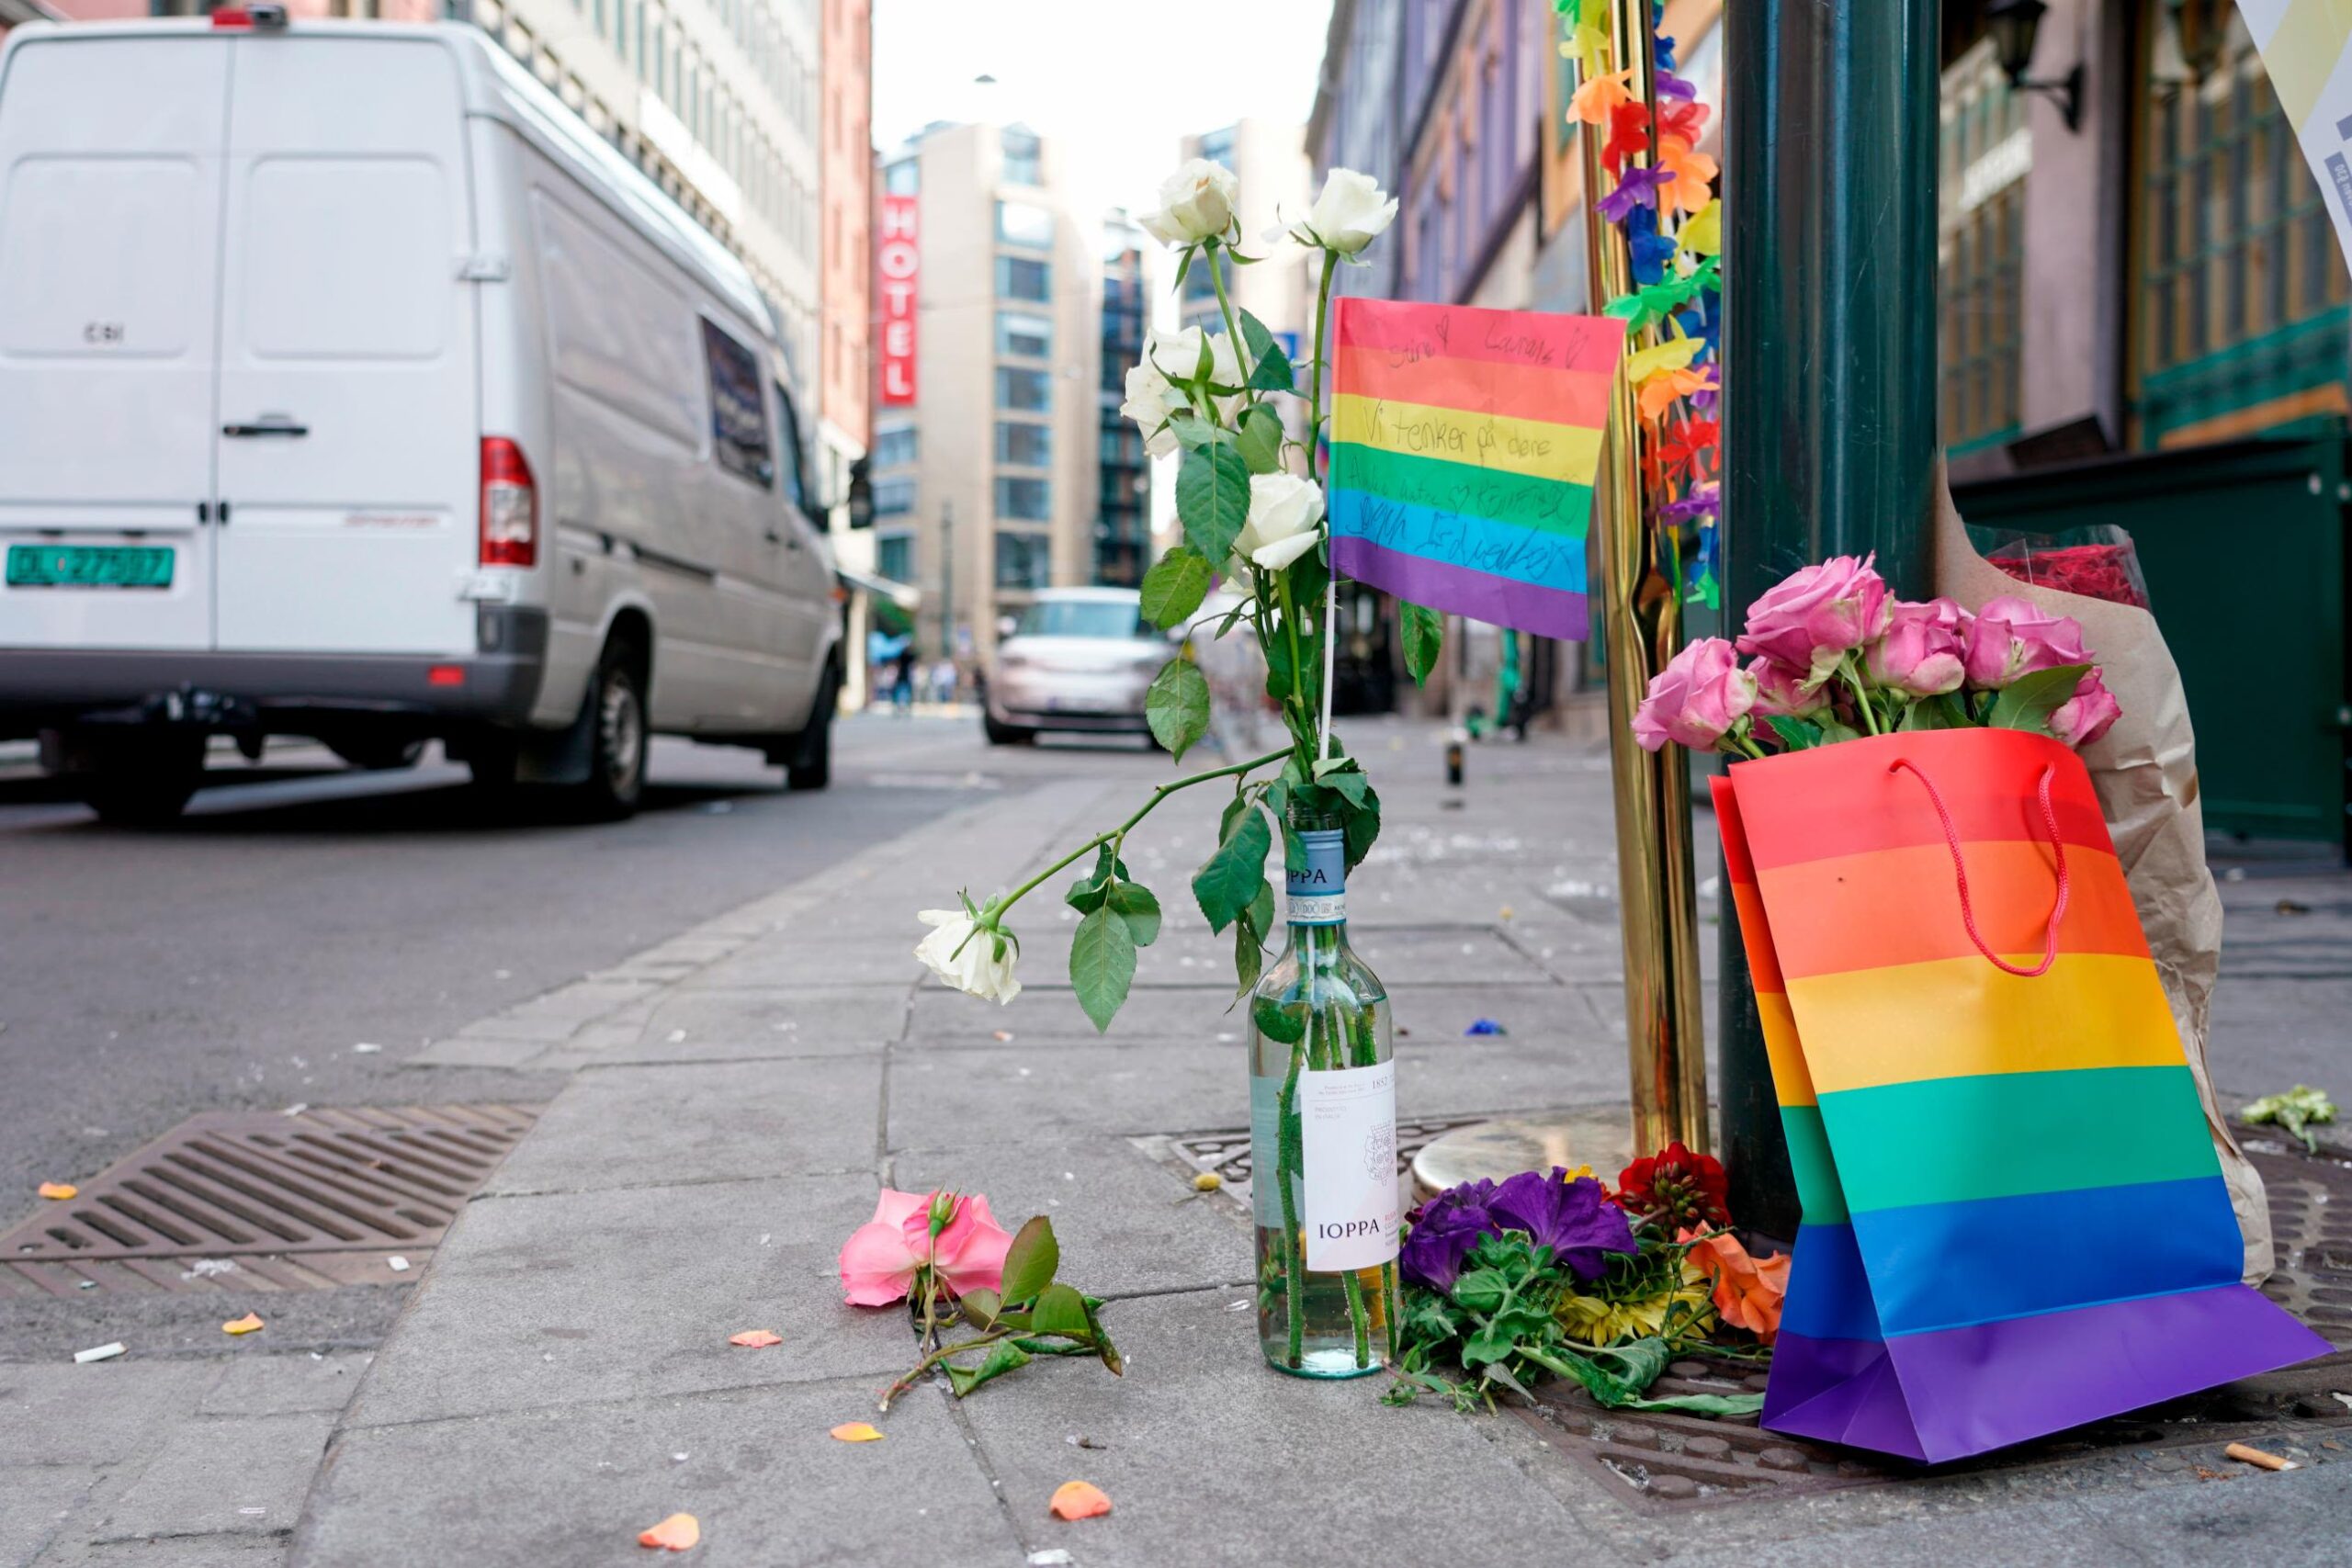 Man accused of a deadly shooting at a gay bar during Oslo Pride celebrations pleads not guilty on first day of trial